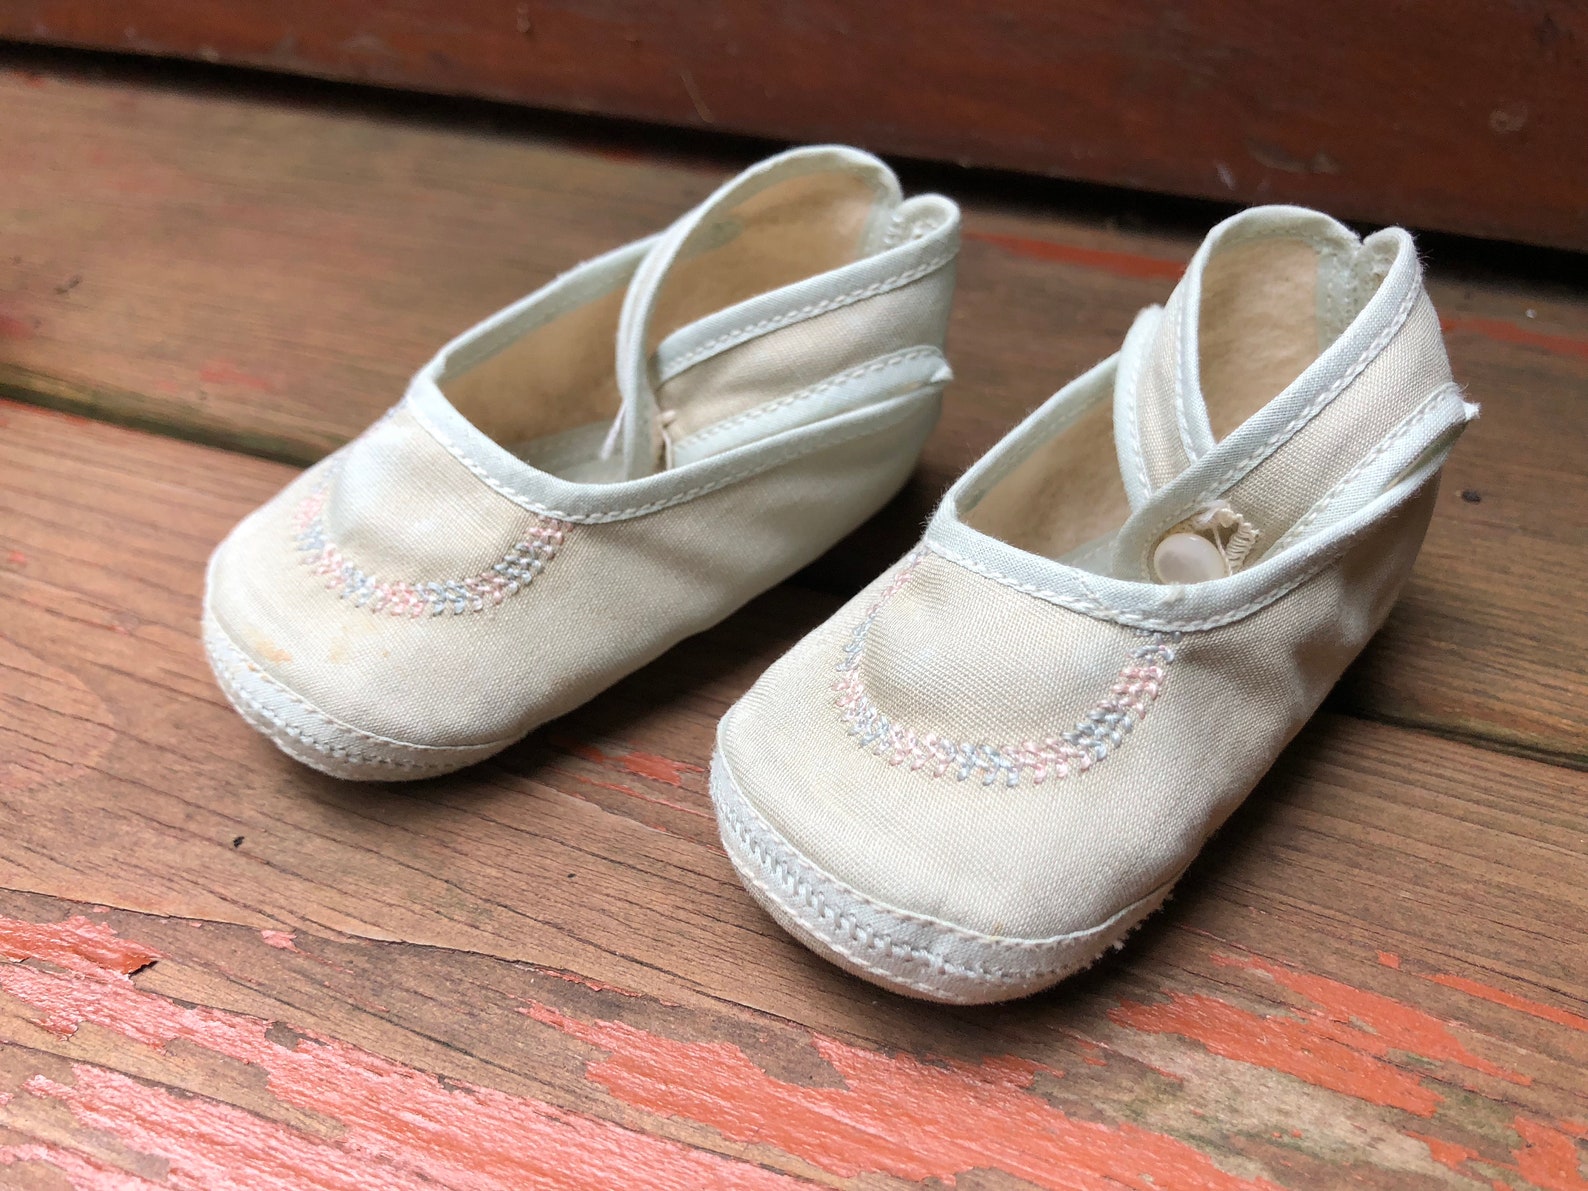 vintage baby booties crib shoes mrs day's ideal baby shoe cotton ballet baby slippers mid century antique vintage nursery de